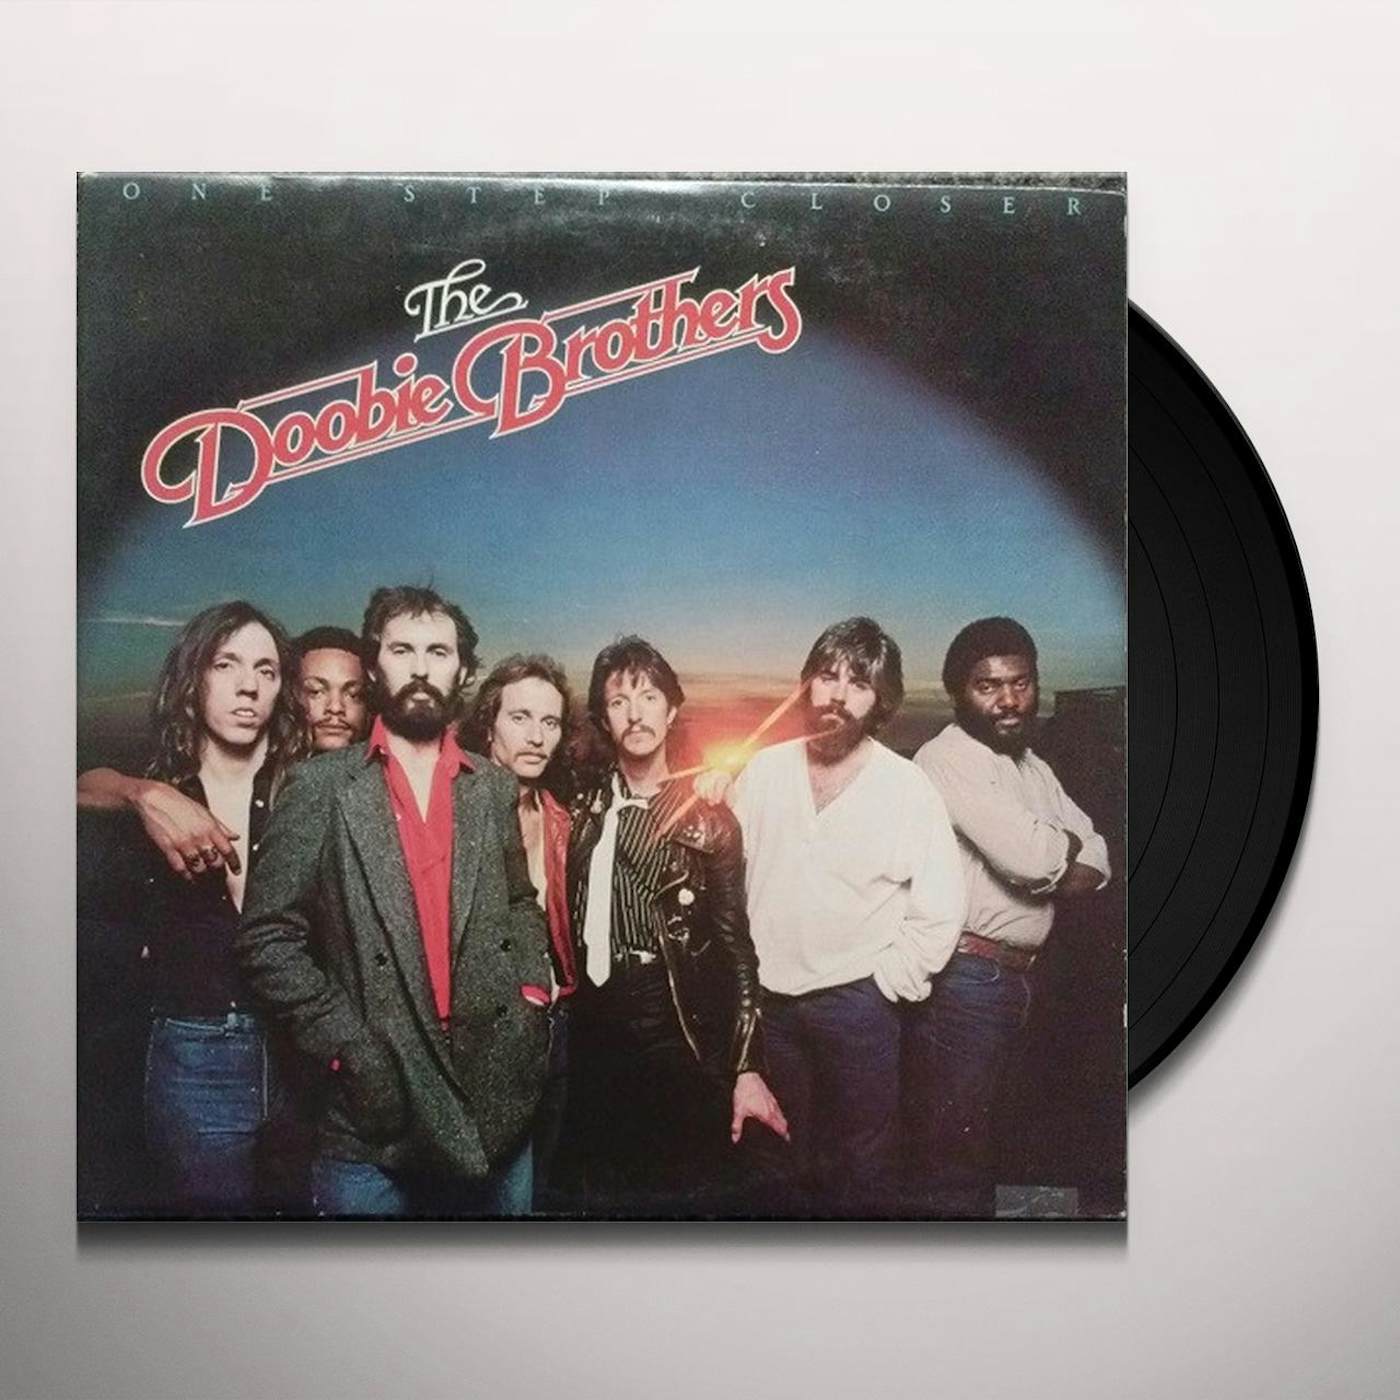 The Doobie Brothers ONE STEP CLOSER (REAL LOVE) Vinyl Record